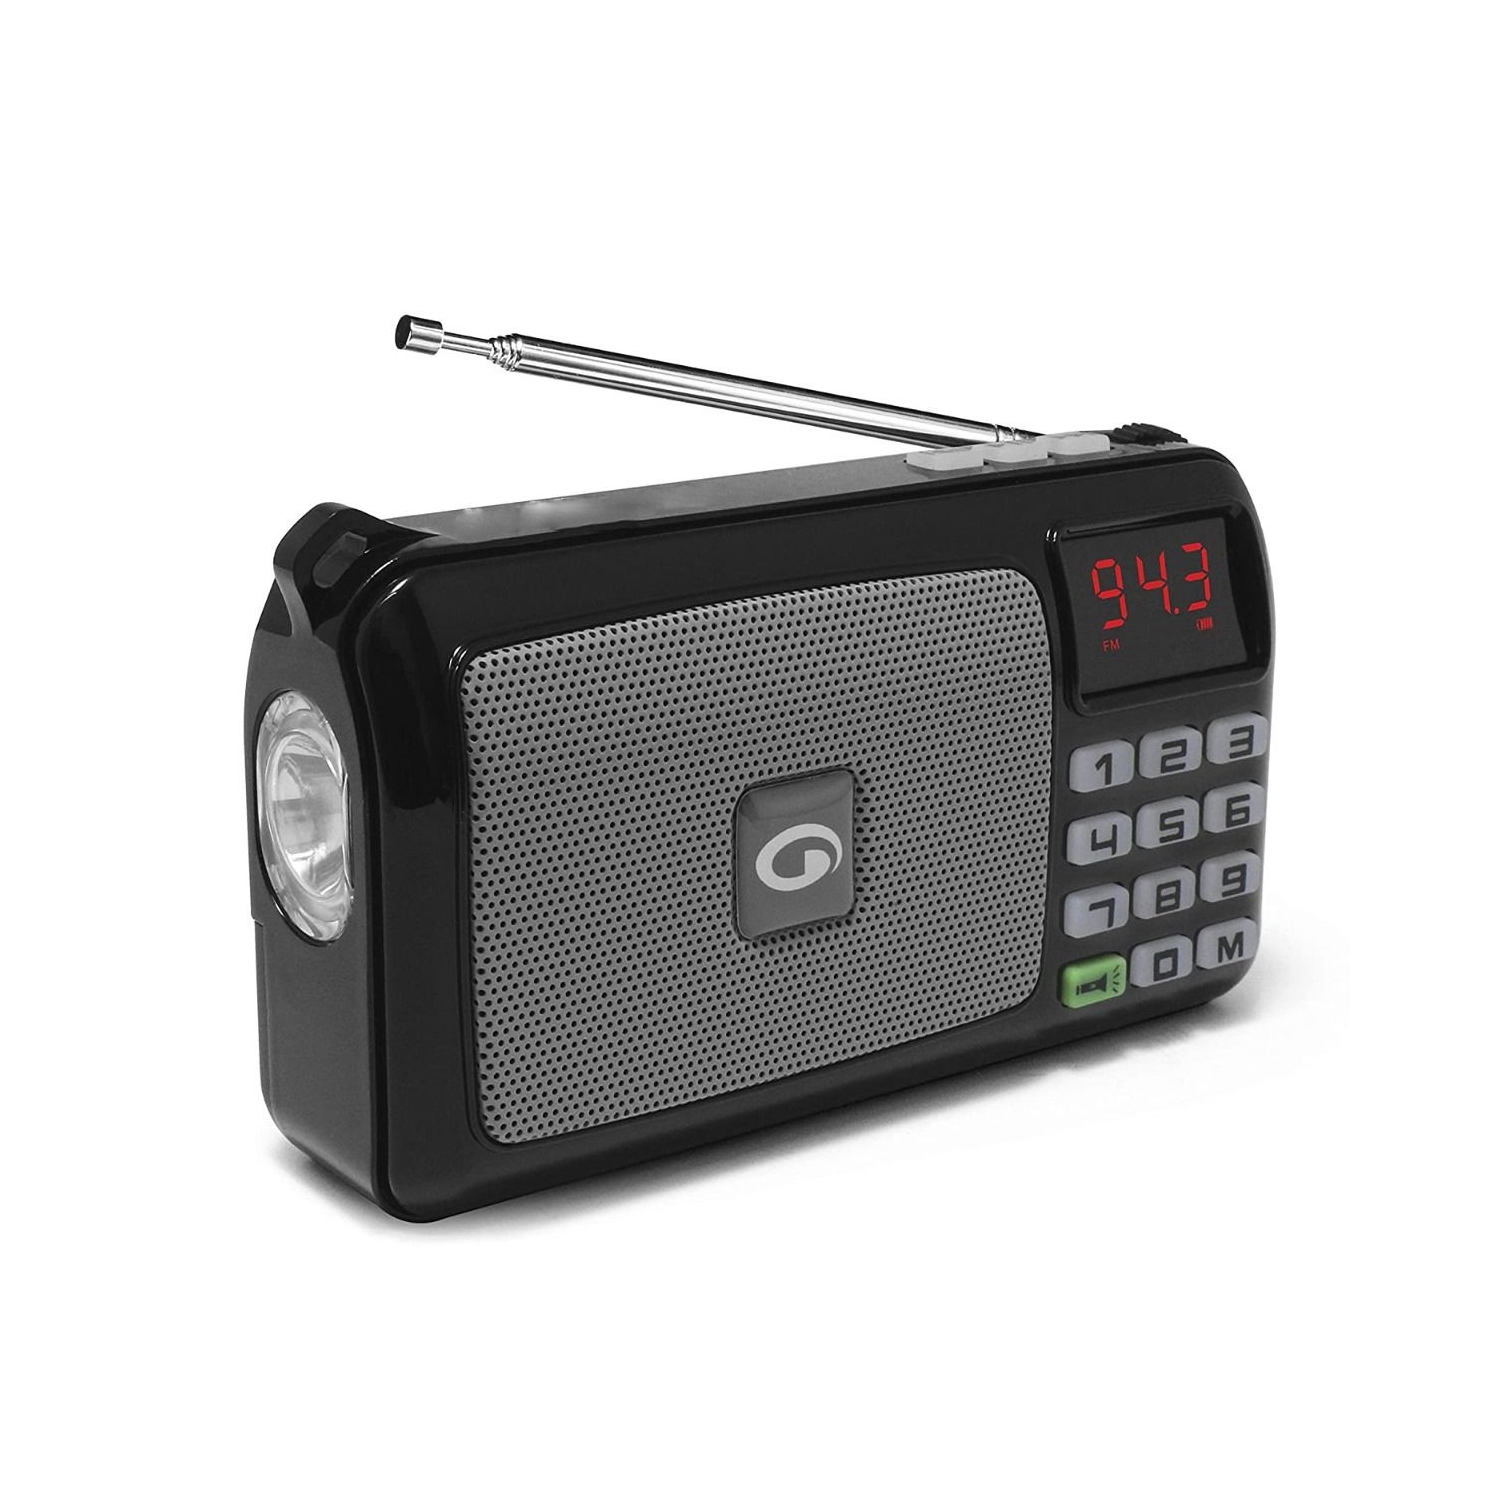 Portable AM FM Radio with Best Reception,Rechargeable or AC Power,Big Speaker,Large Tuning Knob,Clear Dial,Earphone Jack for Gift,Elder,Home